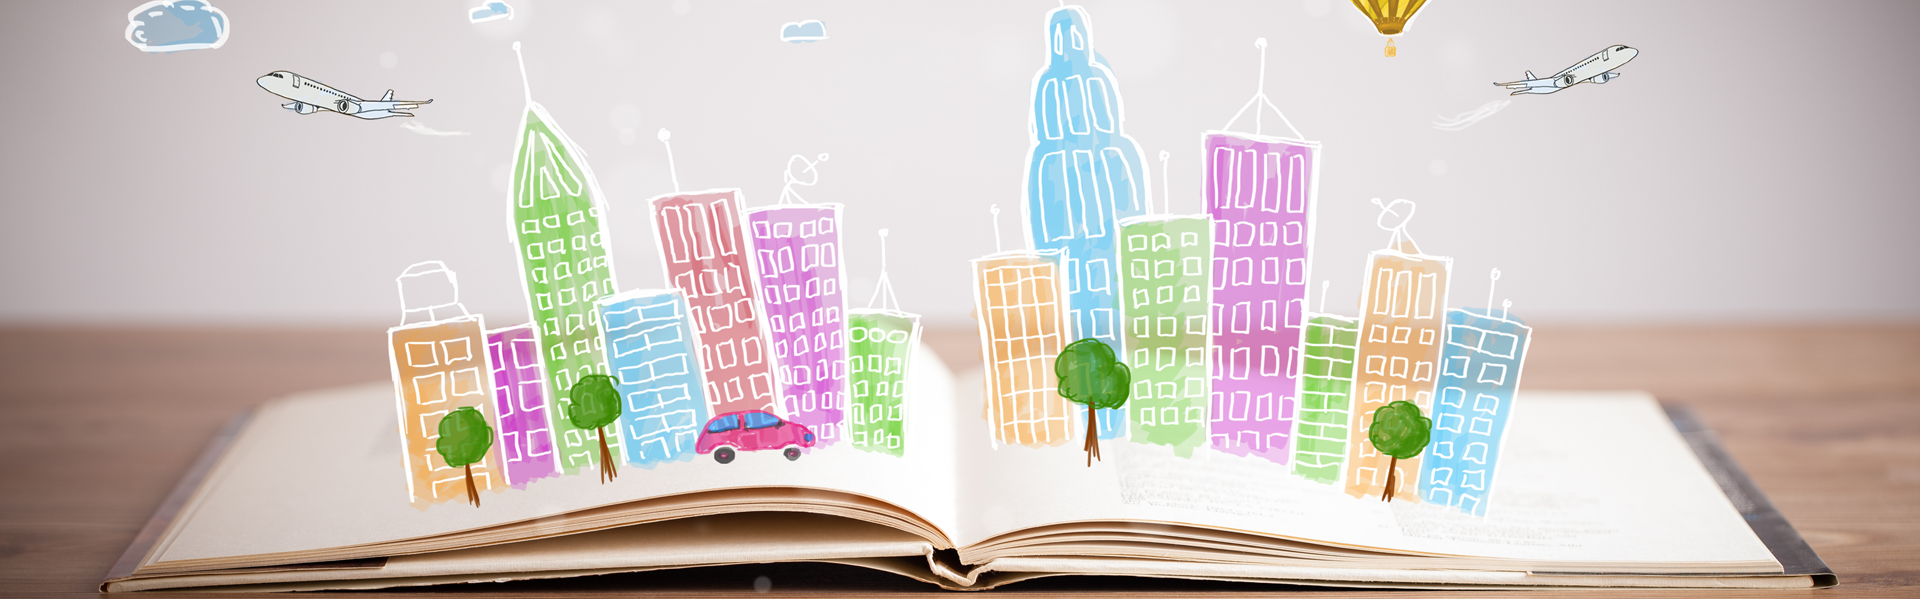 Open book with town illustration